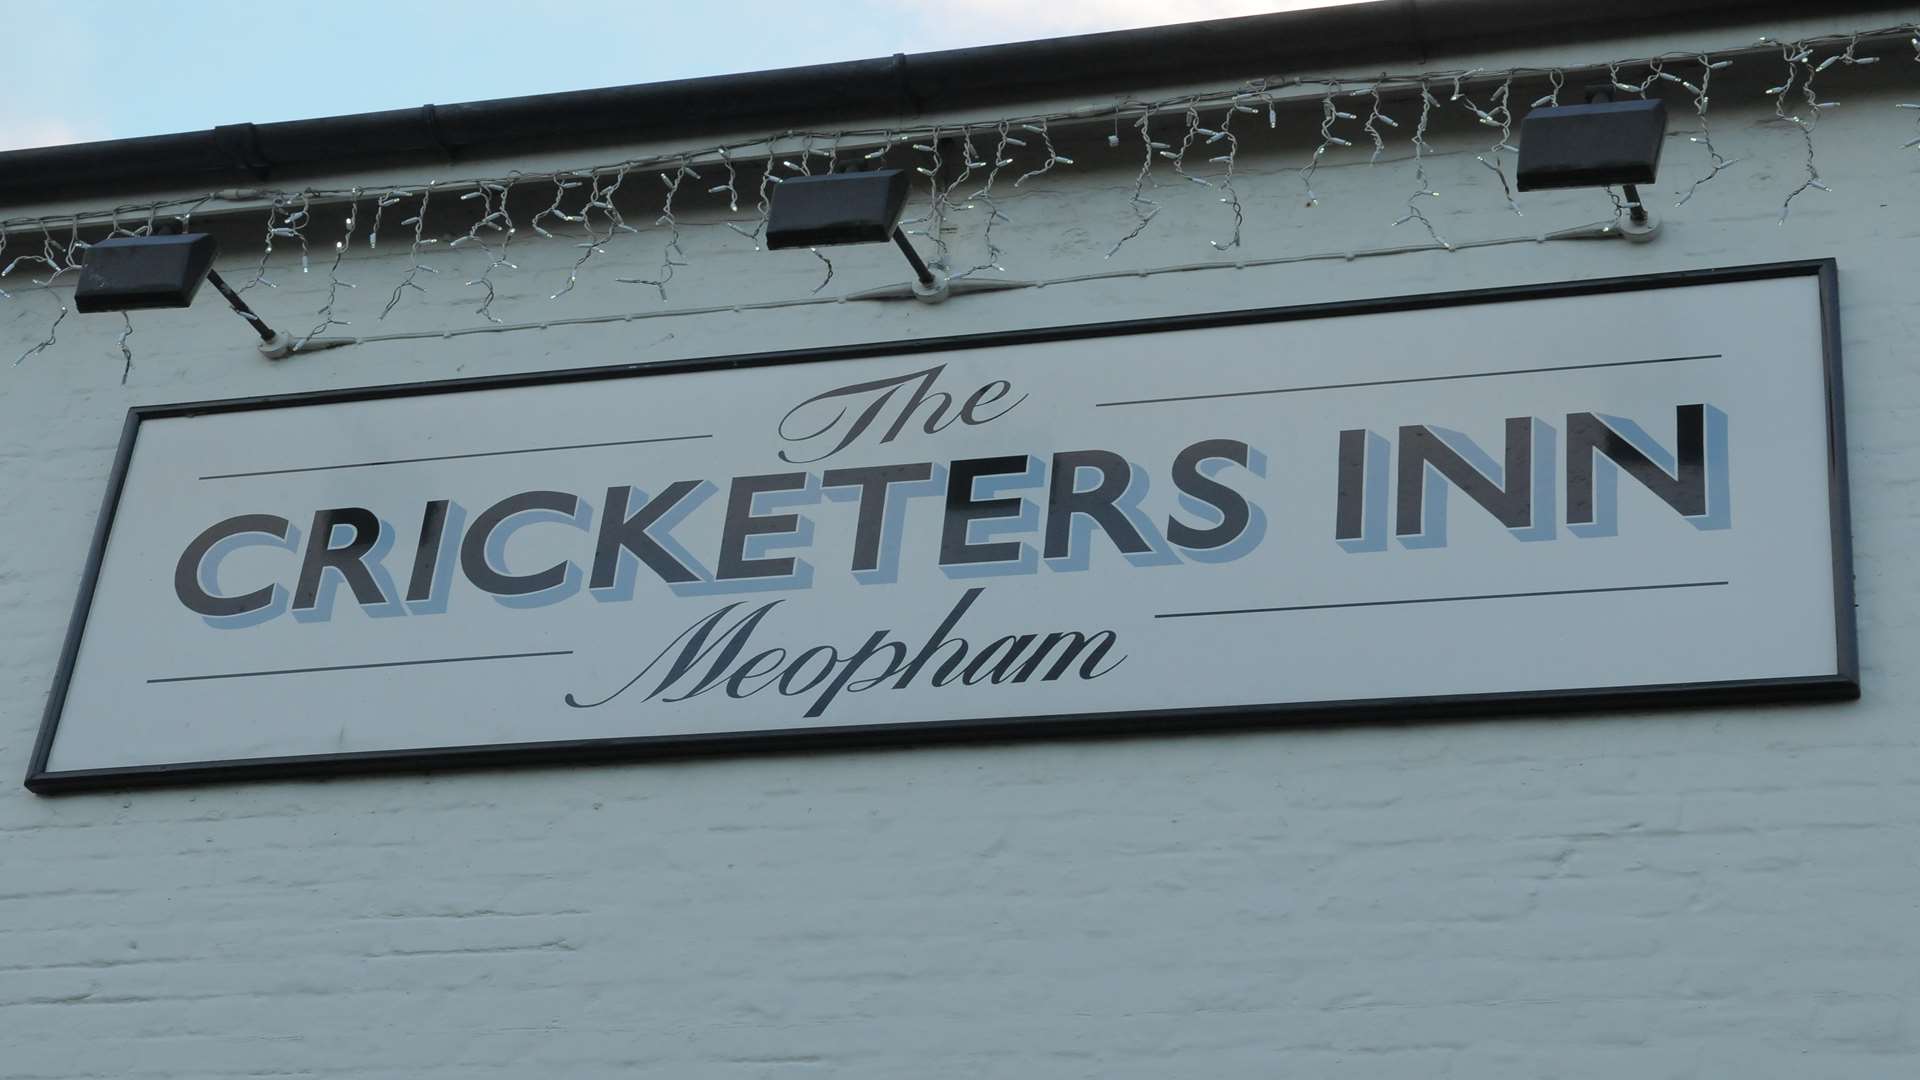 The Cricketers Inn in Meopham is a Whiting & Hammond pub